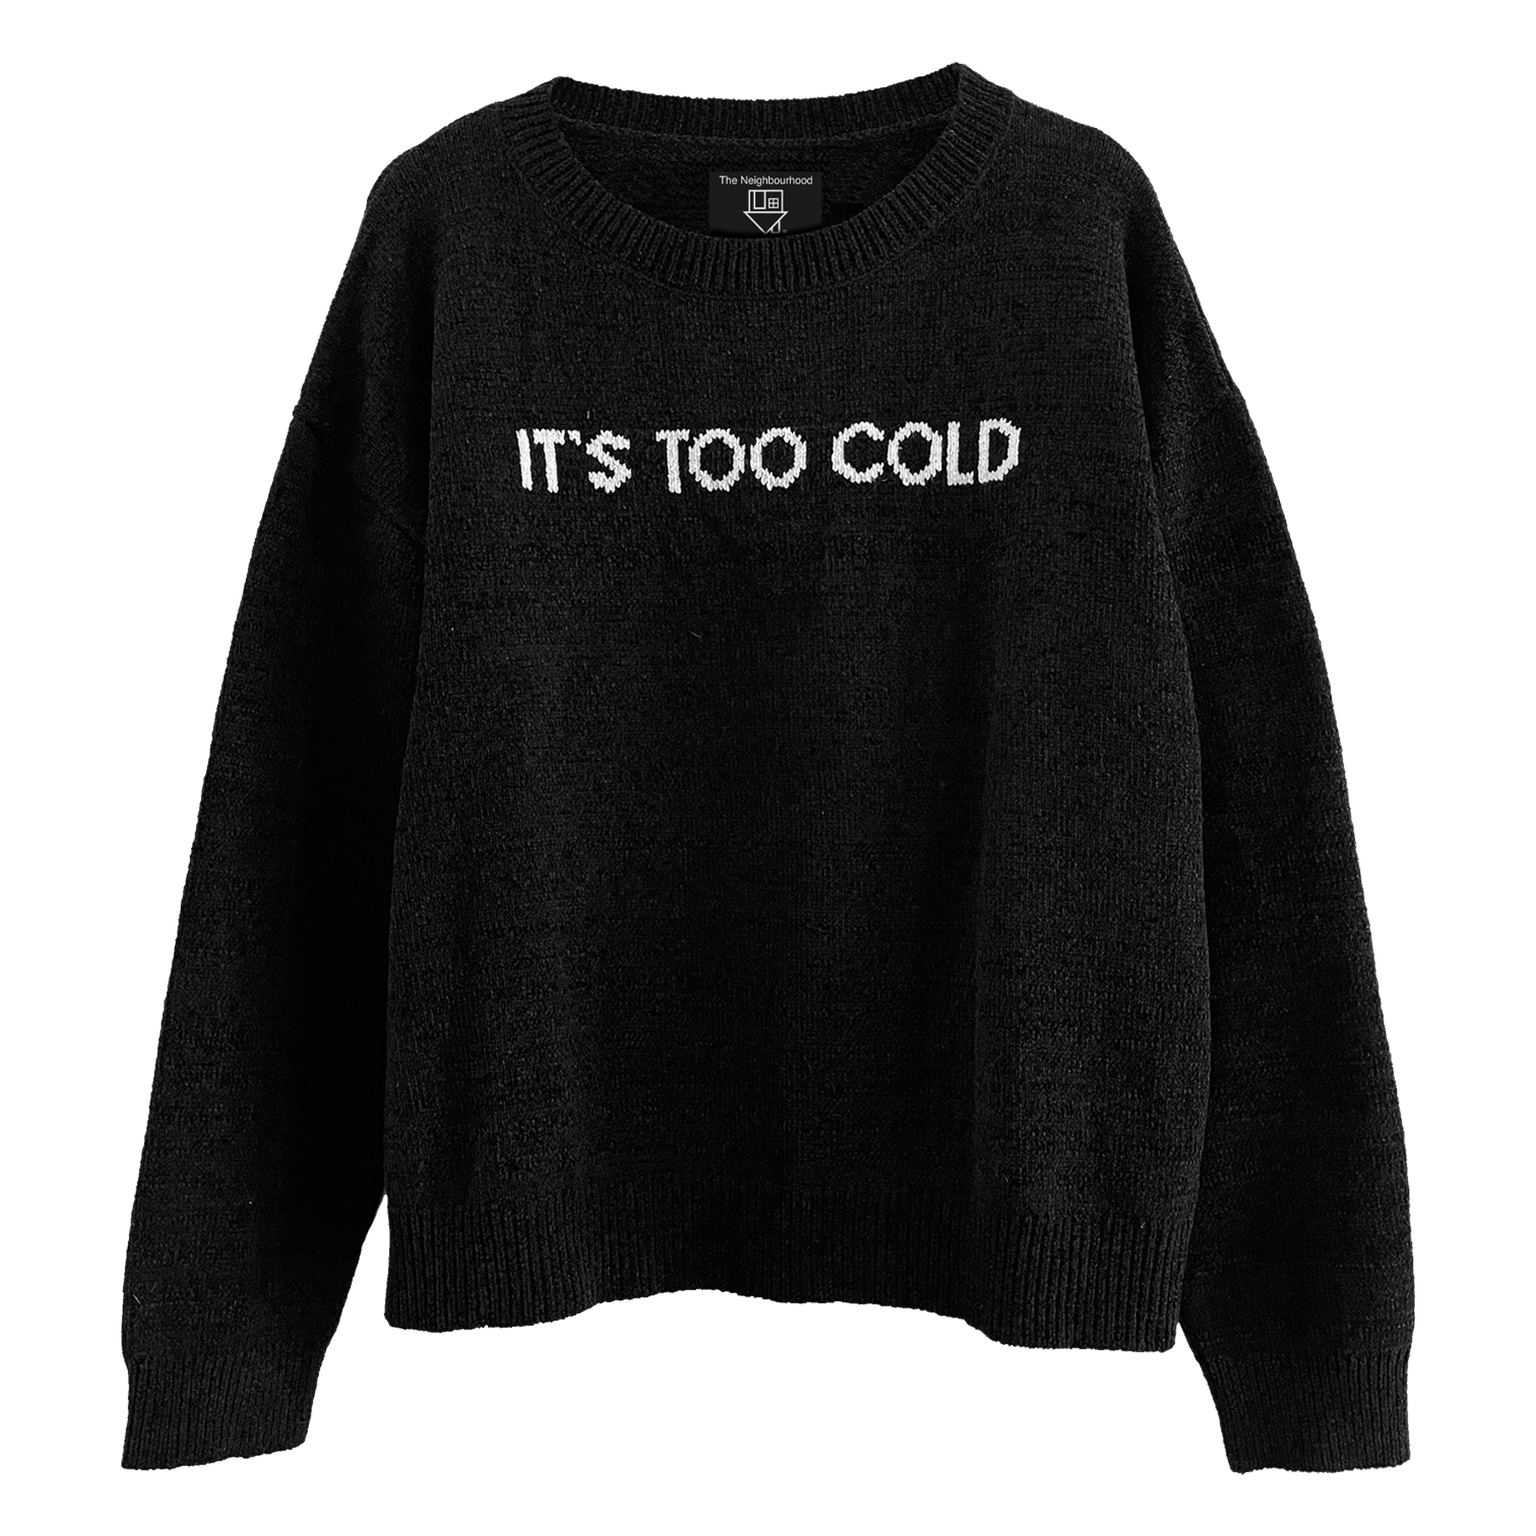 IT'S TOO COLD KNIT SWEATER